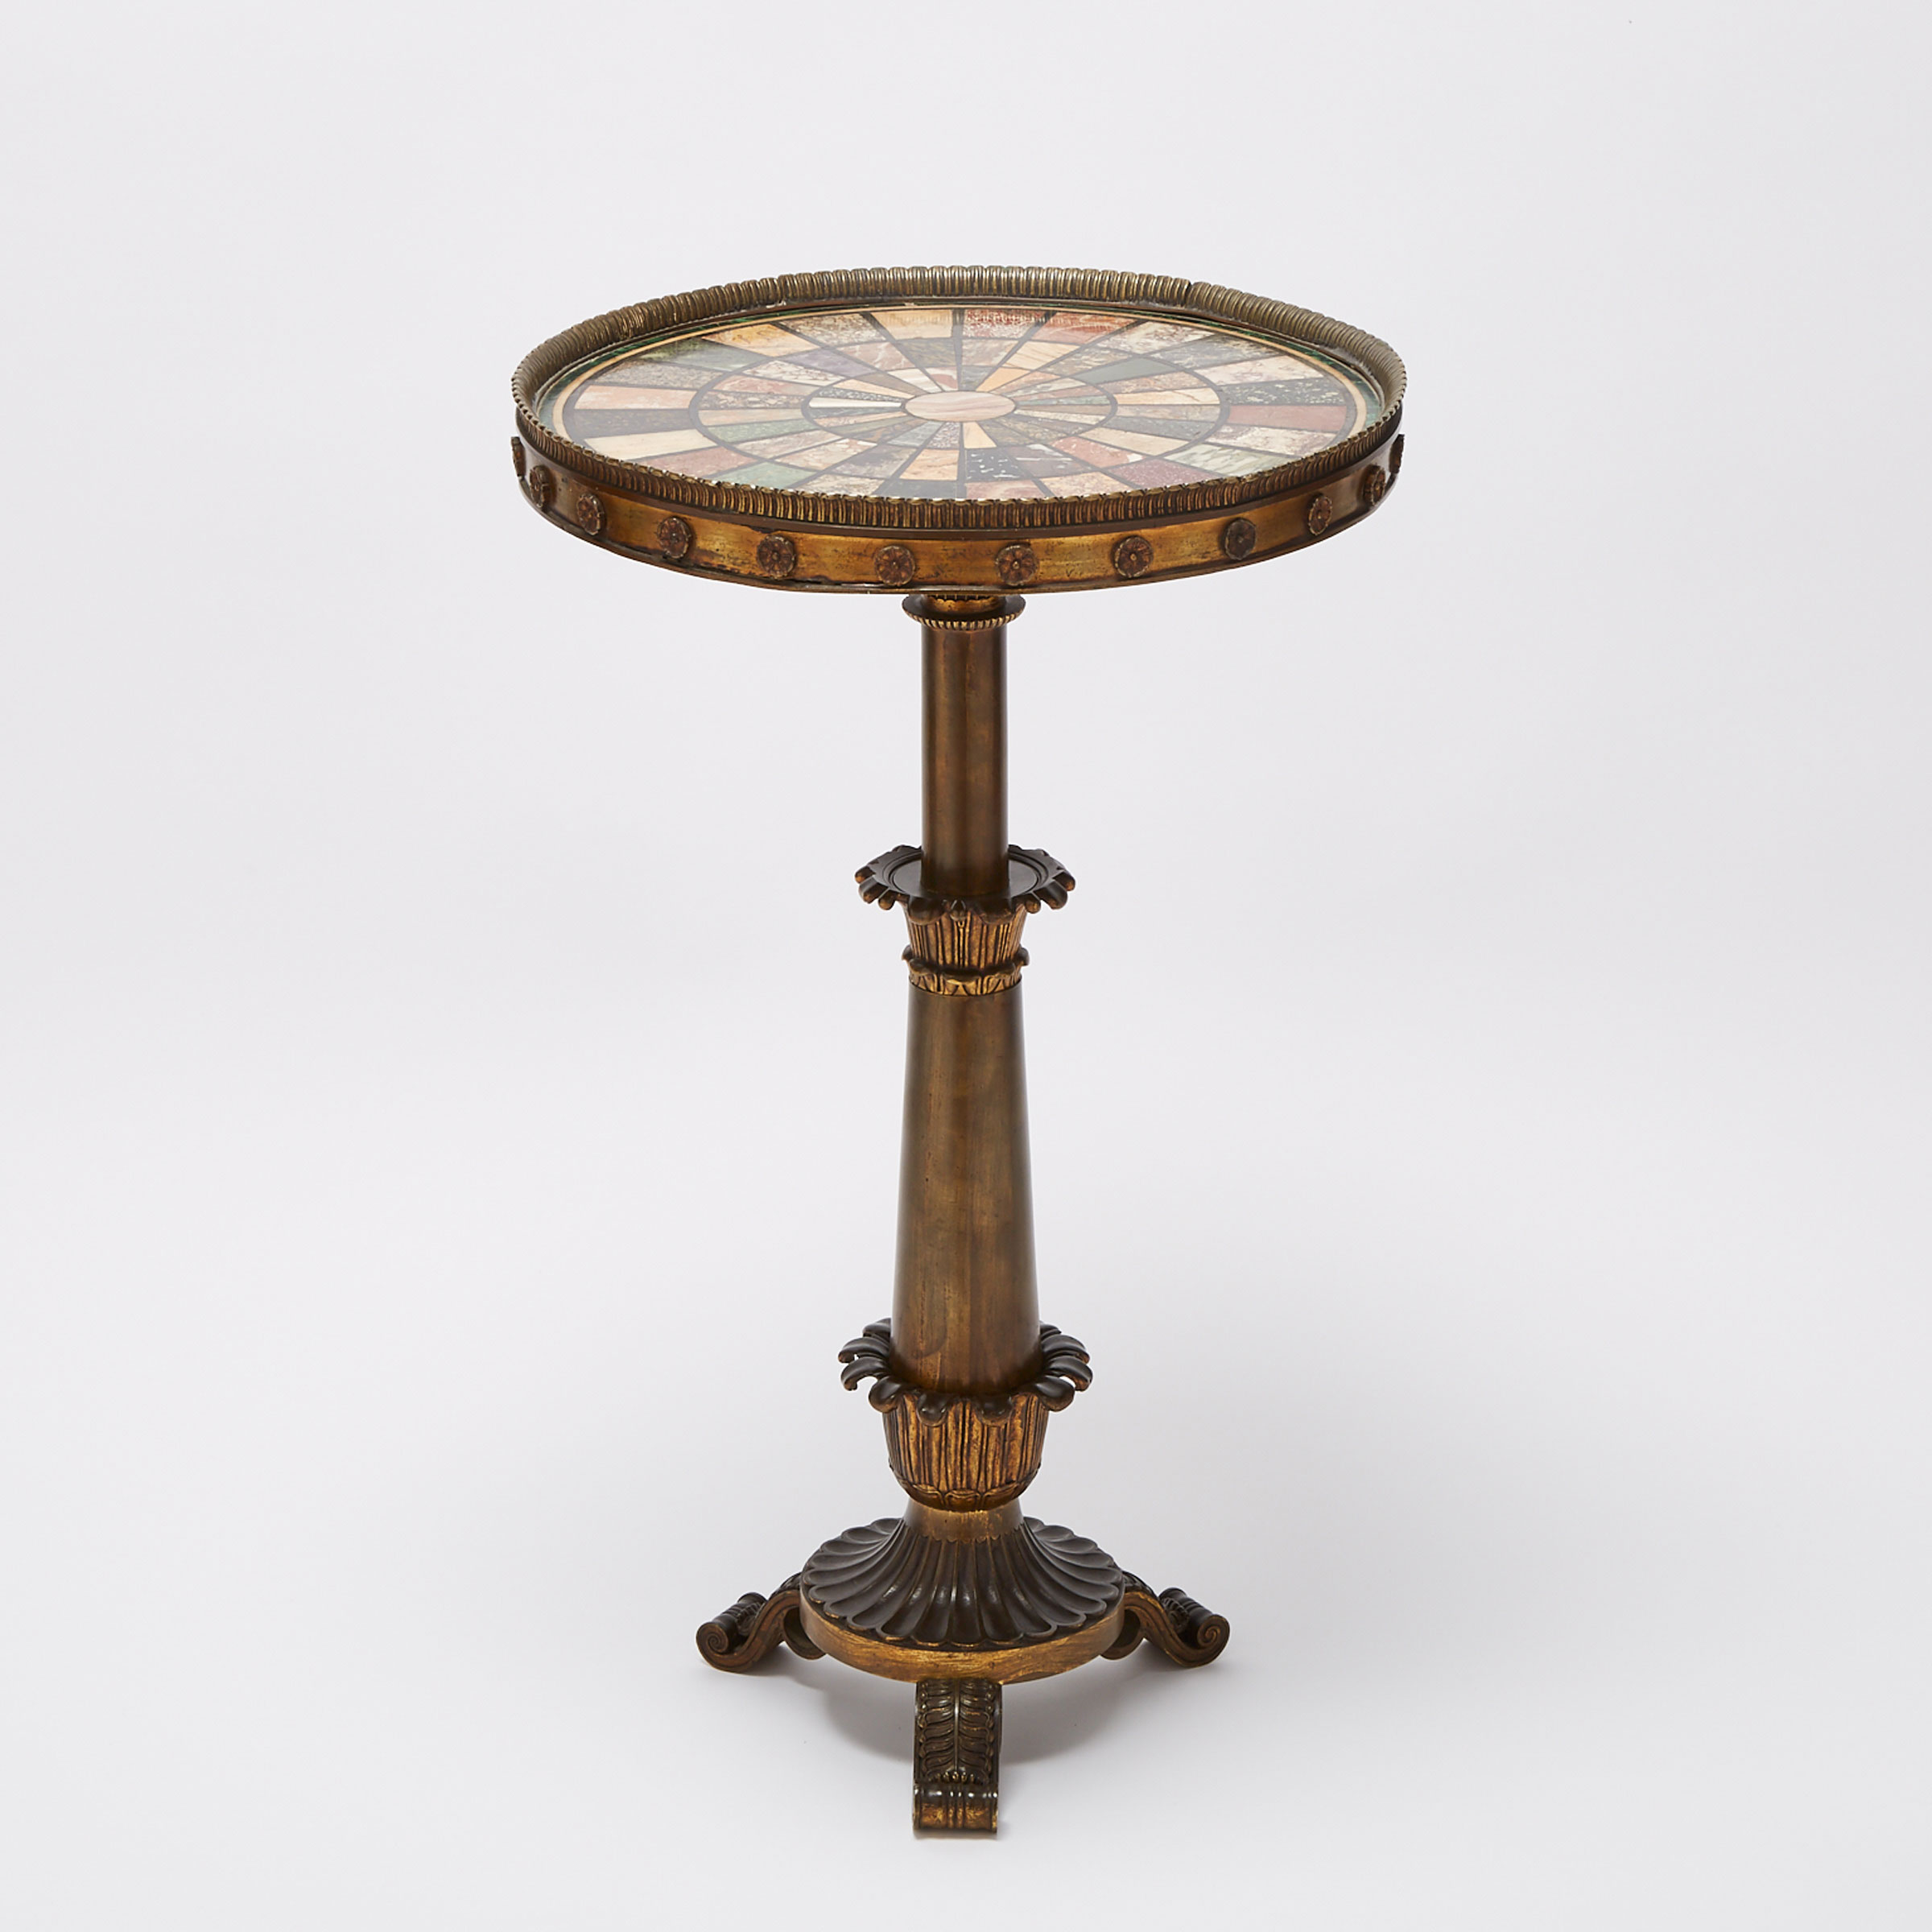 Italian Neoclassical Specimen Marble and Gilt Bronze Occasional Table, mid 19th century